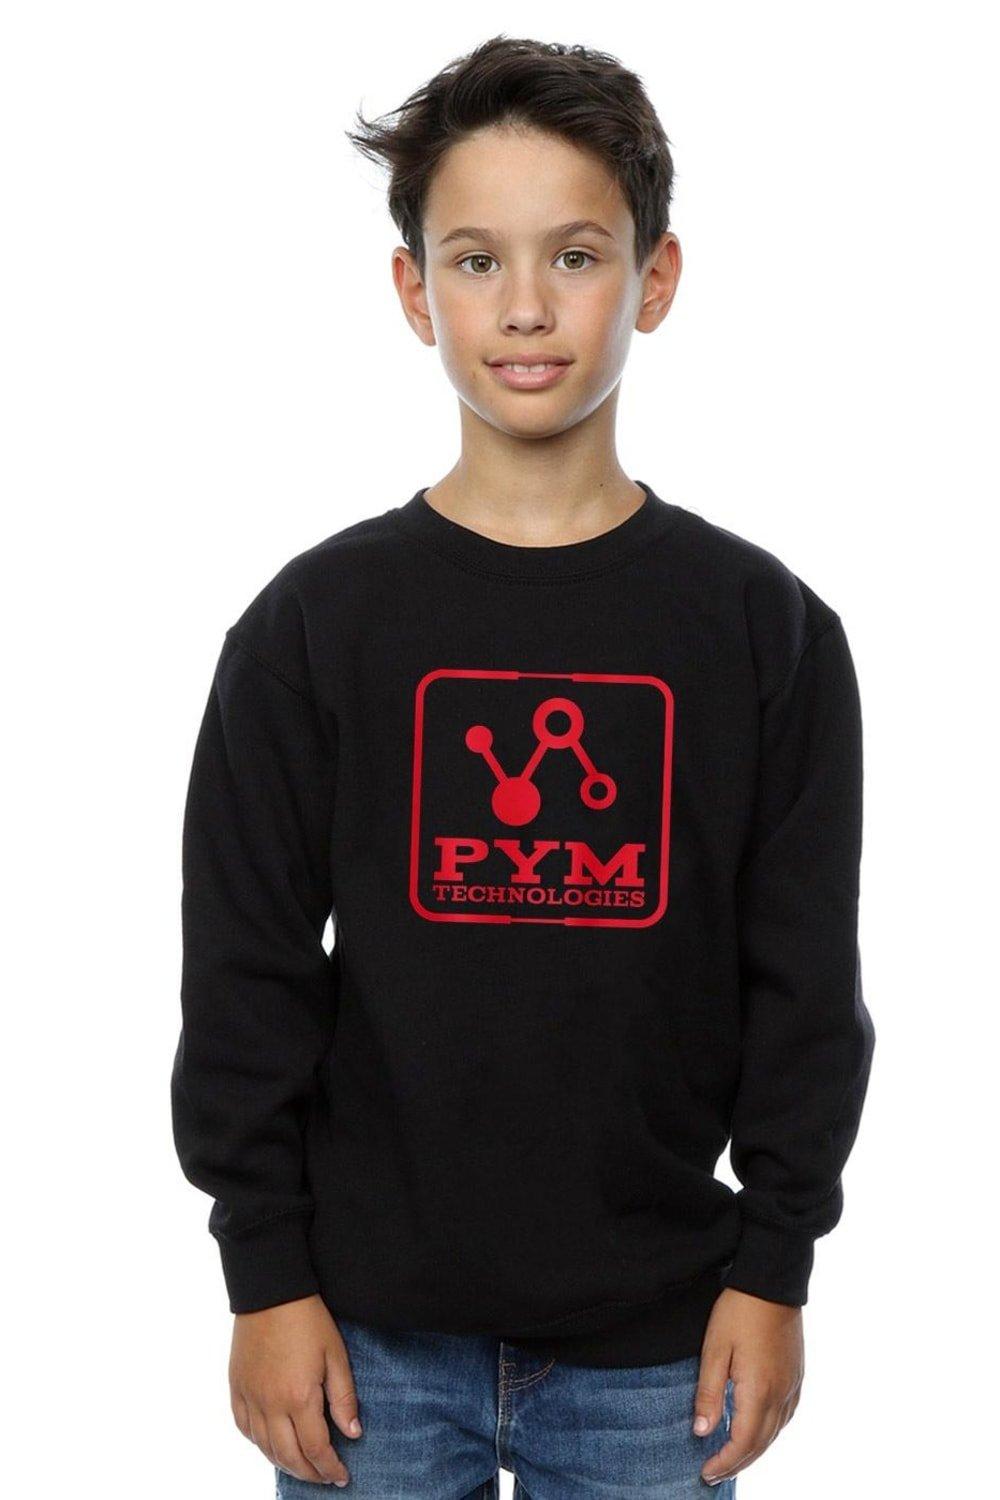 Ant-Man And The Wasp Pym Technologies Sweatshirt